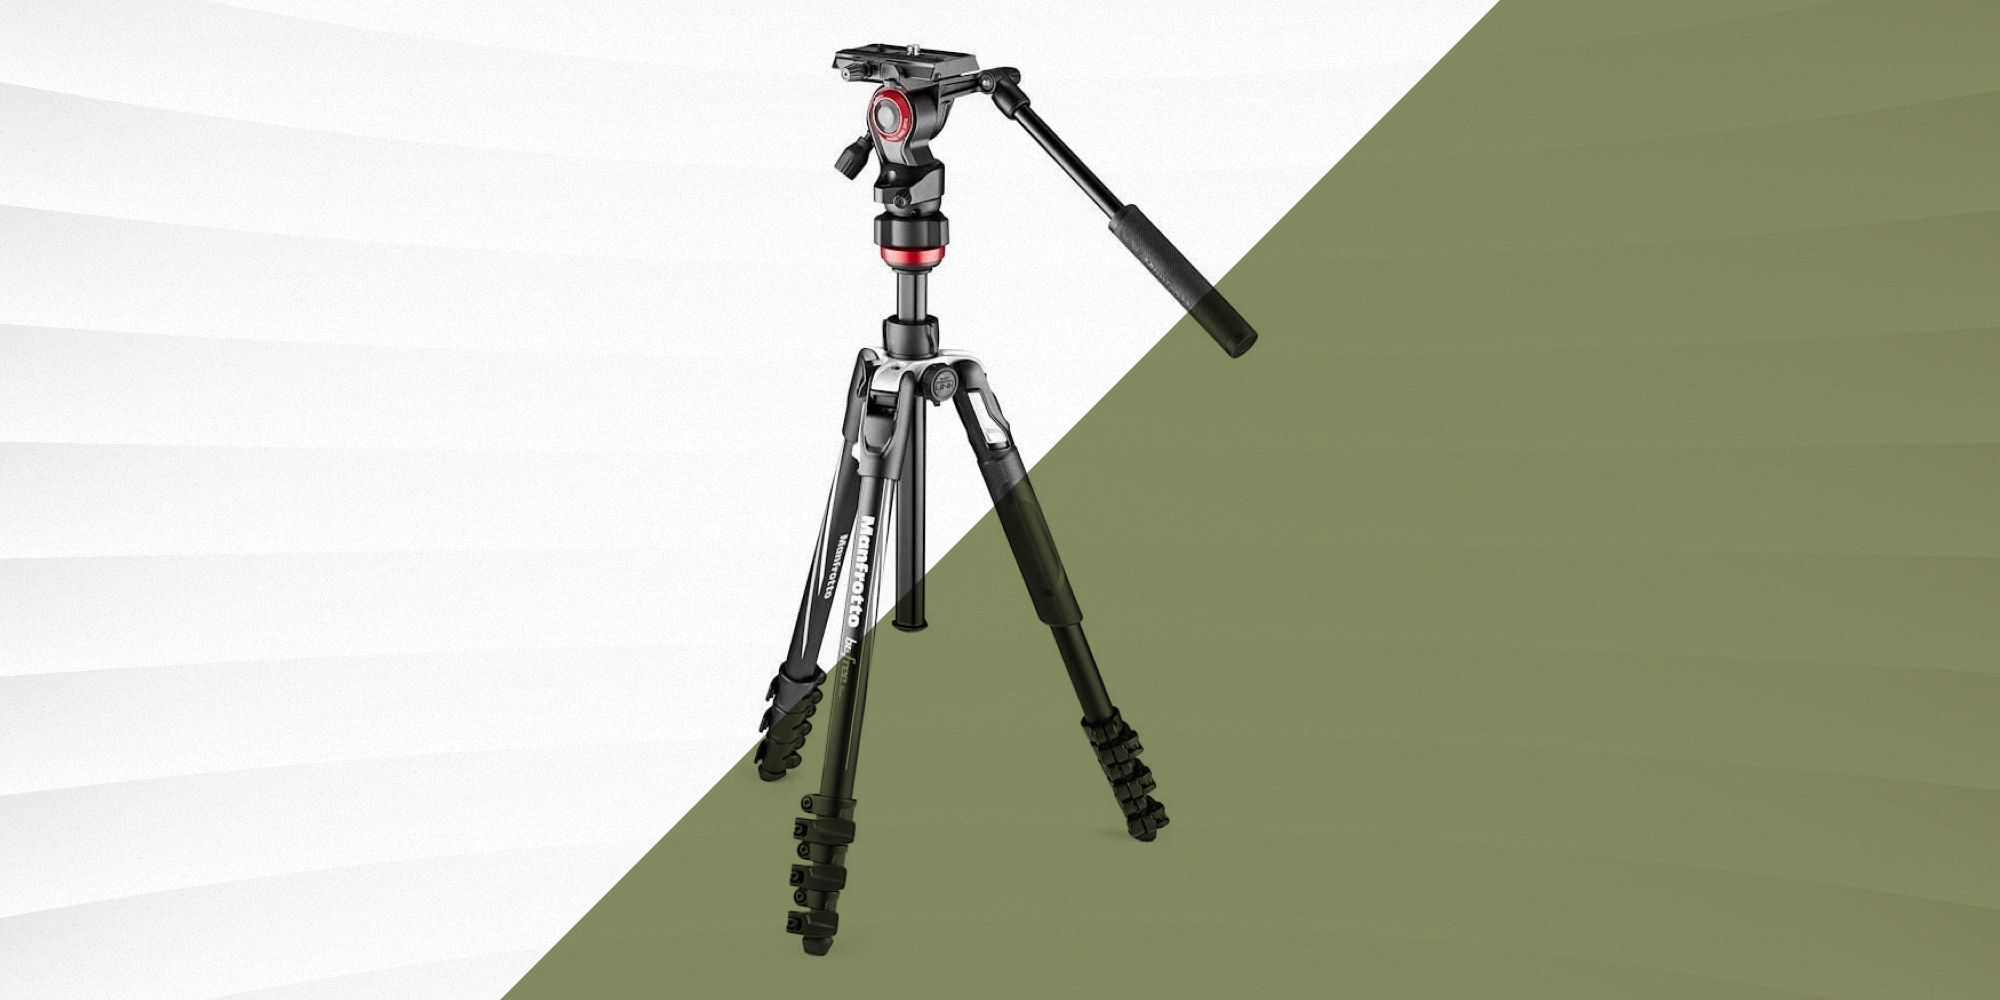 Camera & Bluetooth Remote!! Lightweight Travel Tripod for Smartphone Compact 